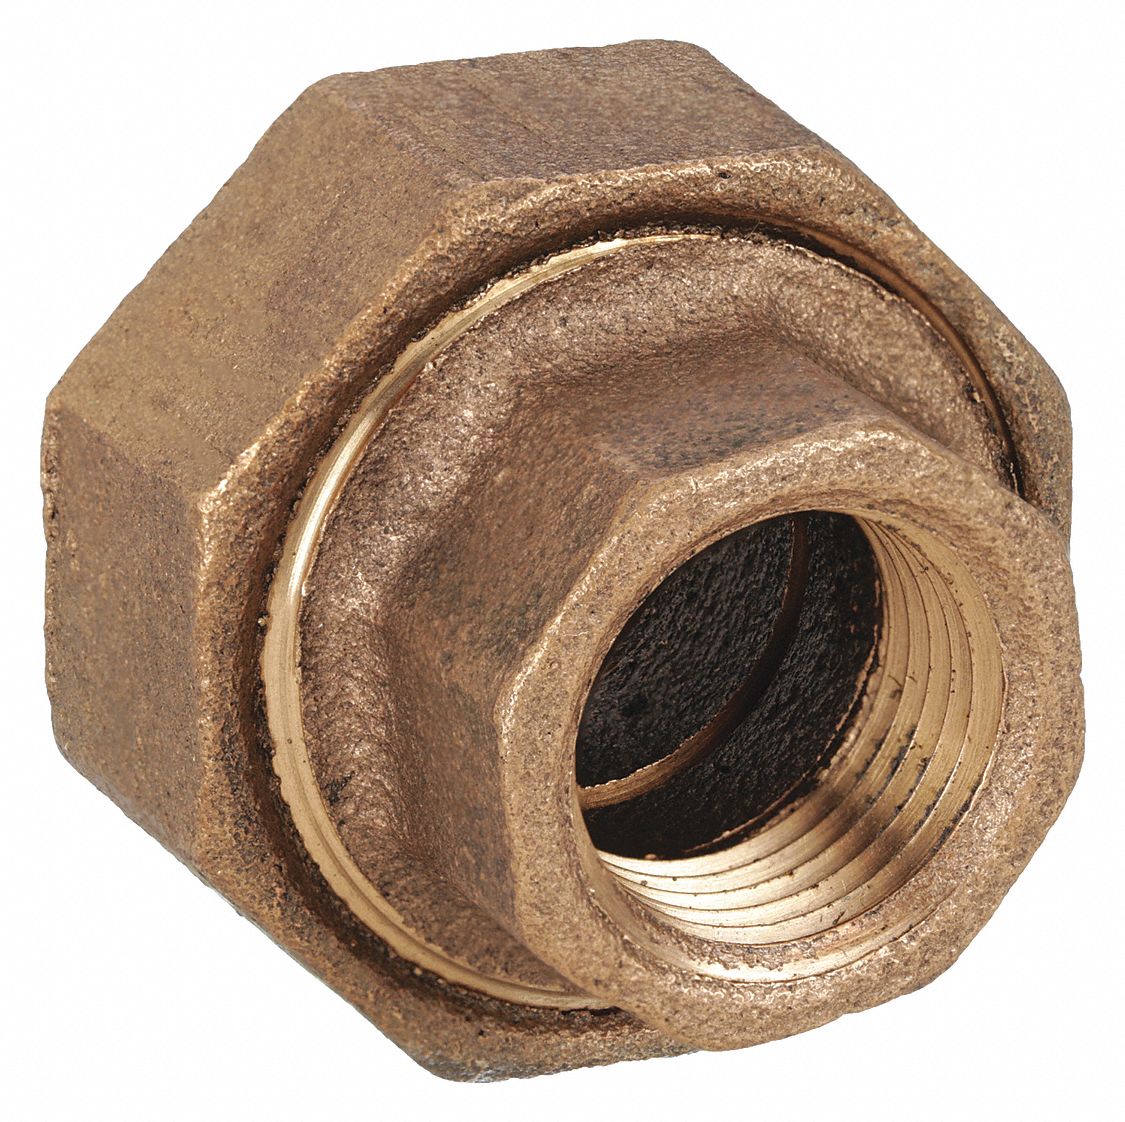 APPROVED VENDOR UNION,RED BRASS,1/2 IN,150 PSI - Metal Pipe Fittings -  GGM1VFK3